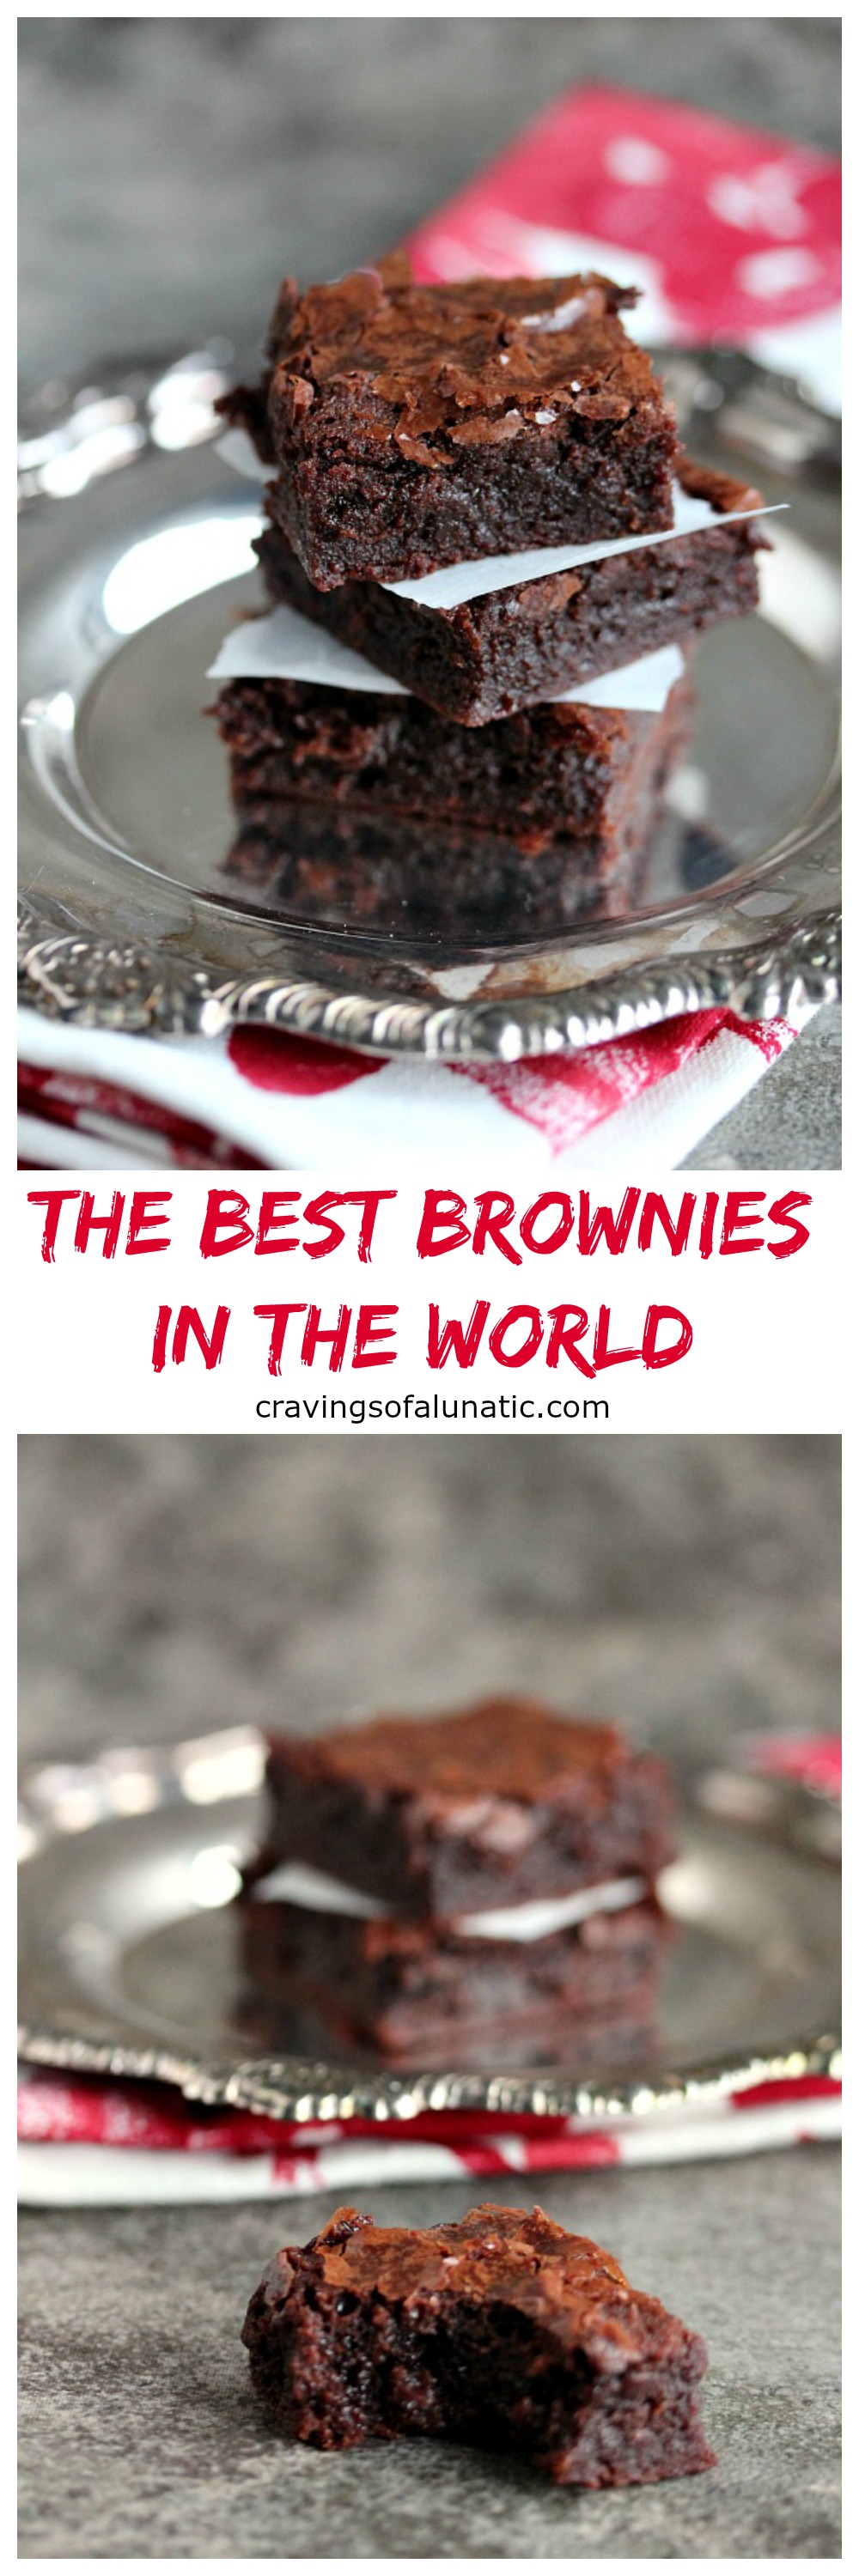 The Best Brownies in the World